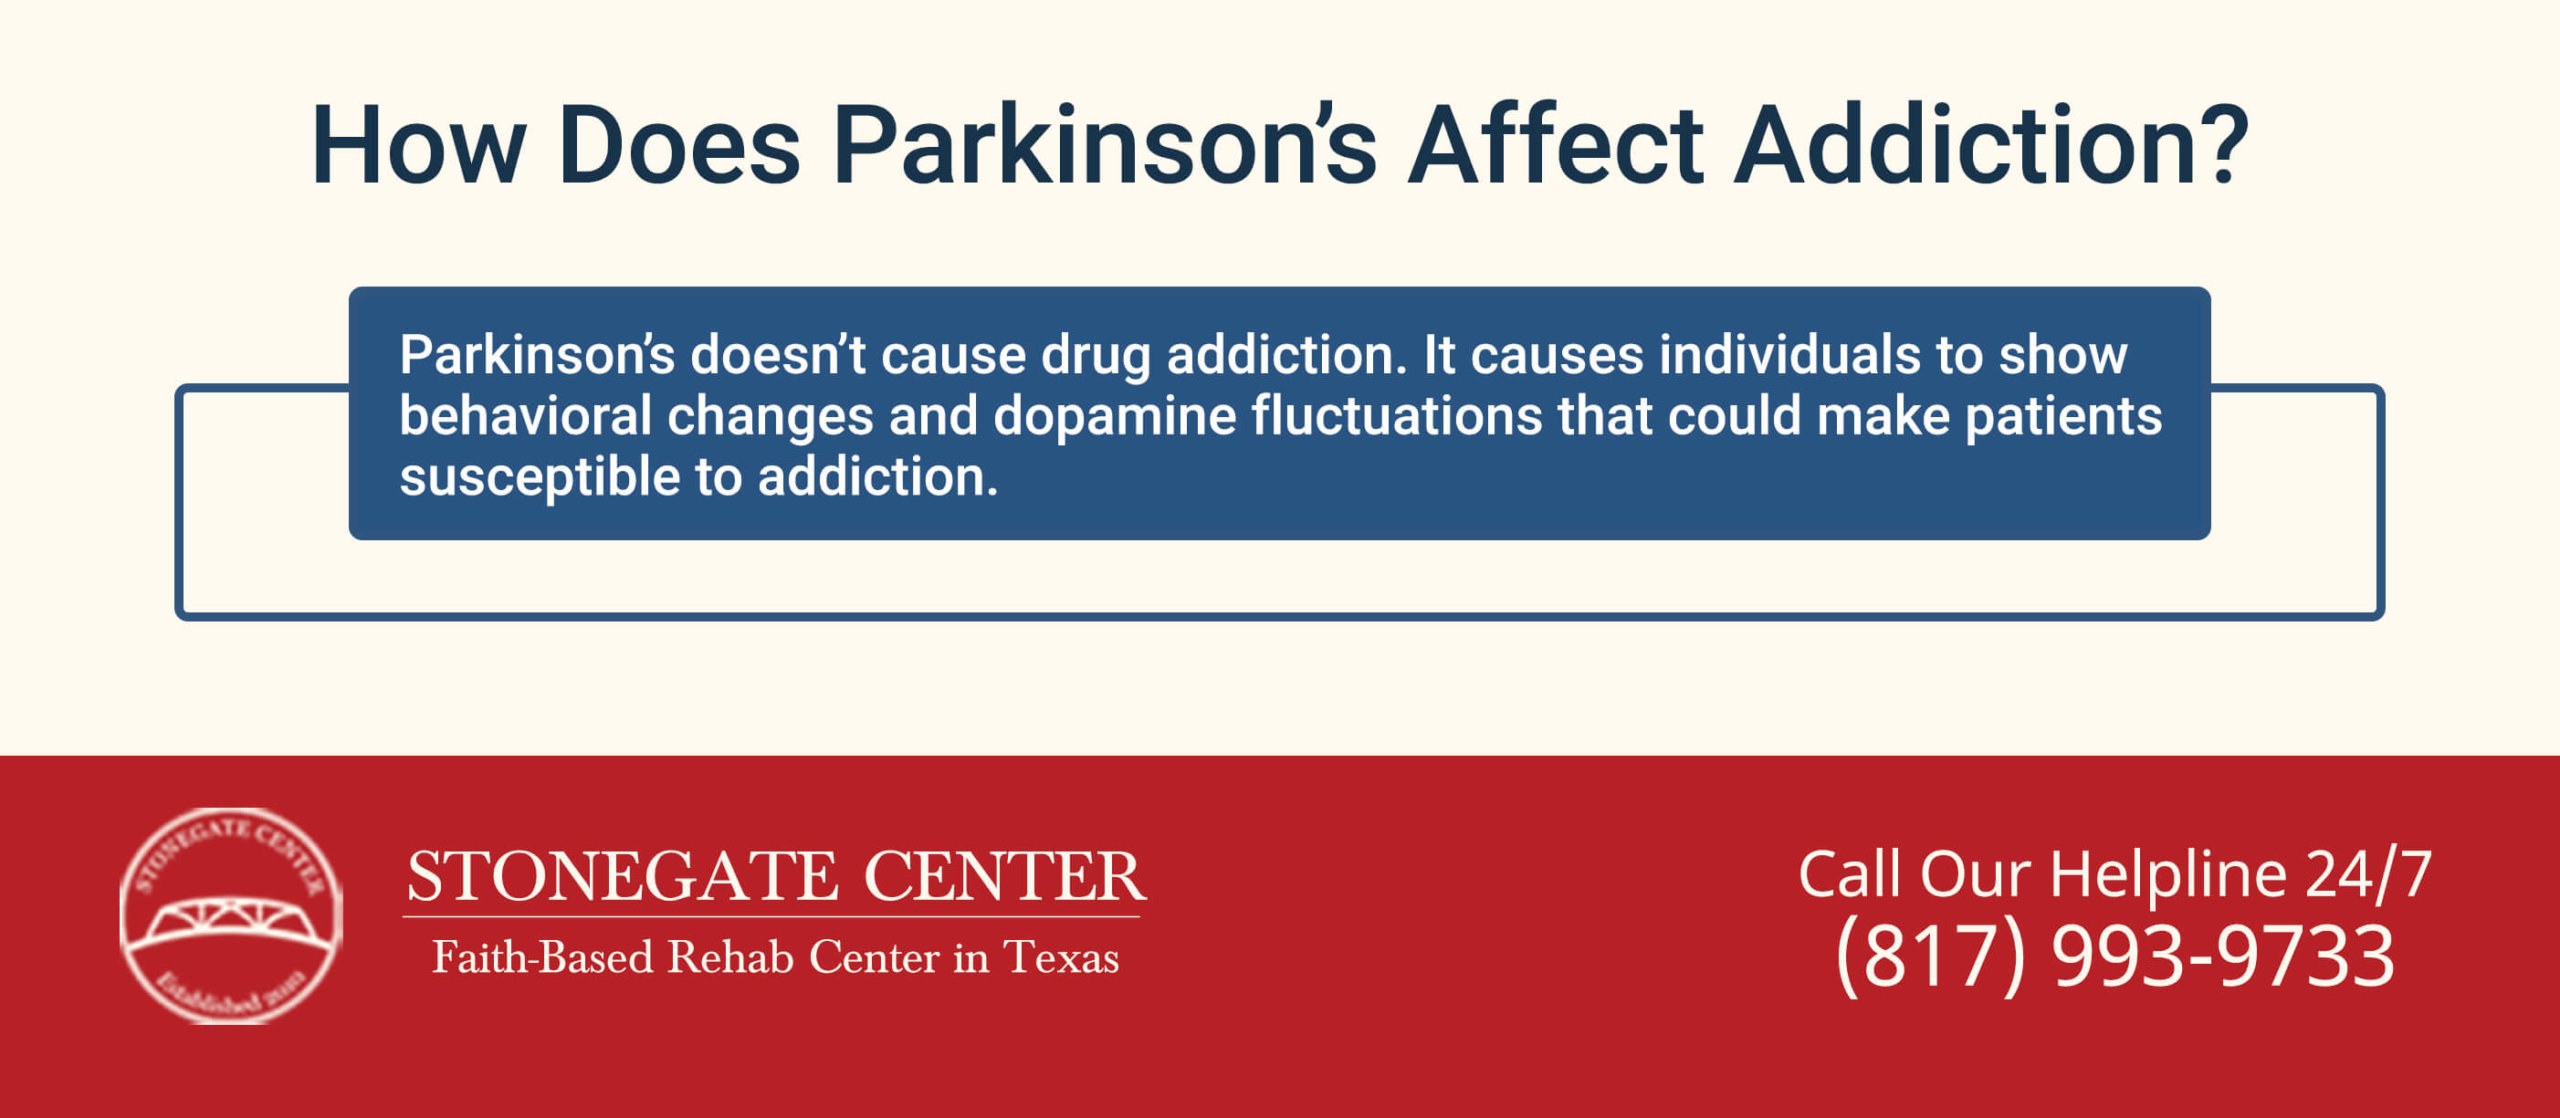 Stonegate Center Blog - Parkinson's Disease Can Tell Us About Addiction - How Does Parkinsons Affect Addiction Infographics